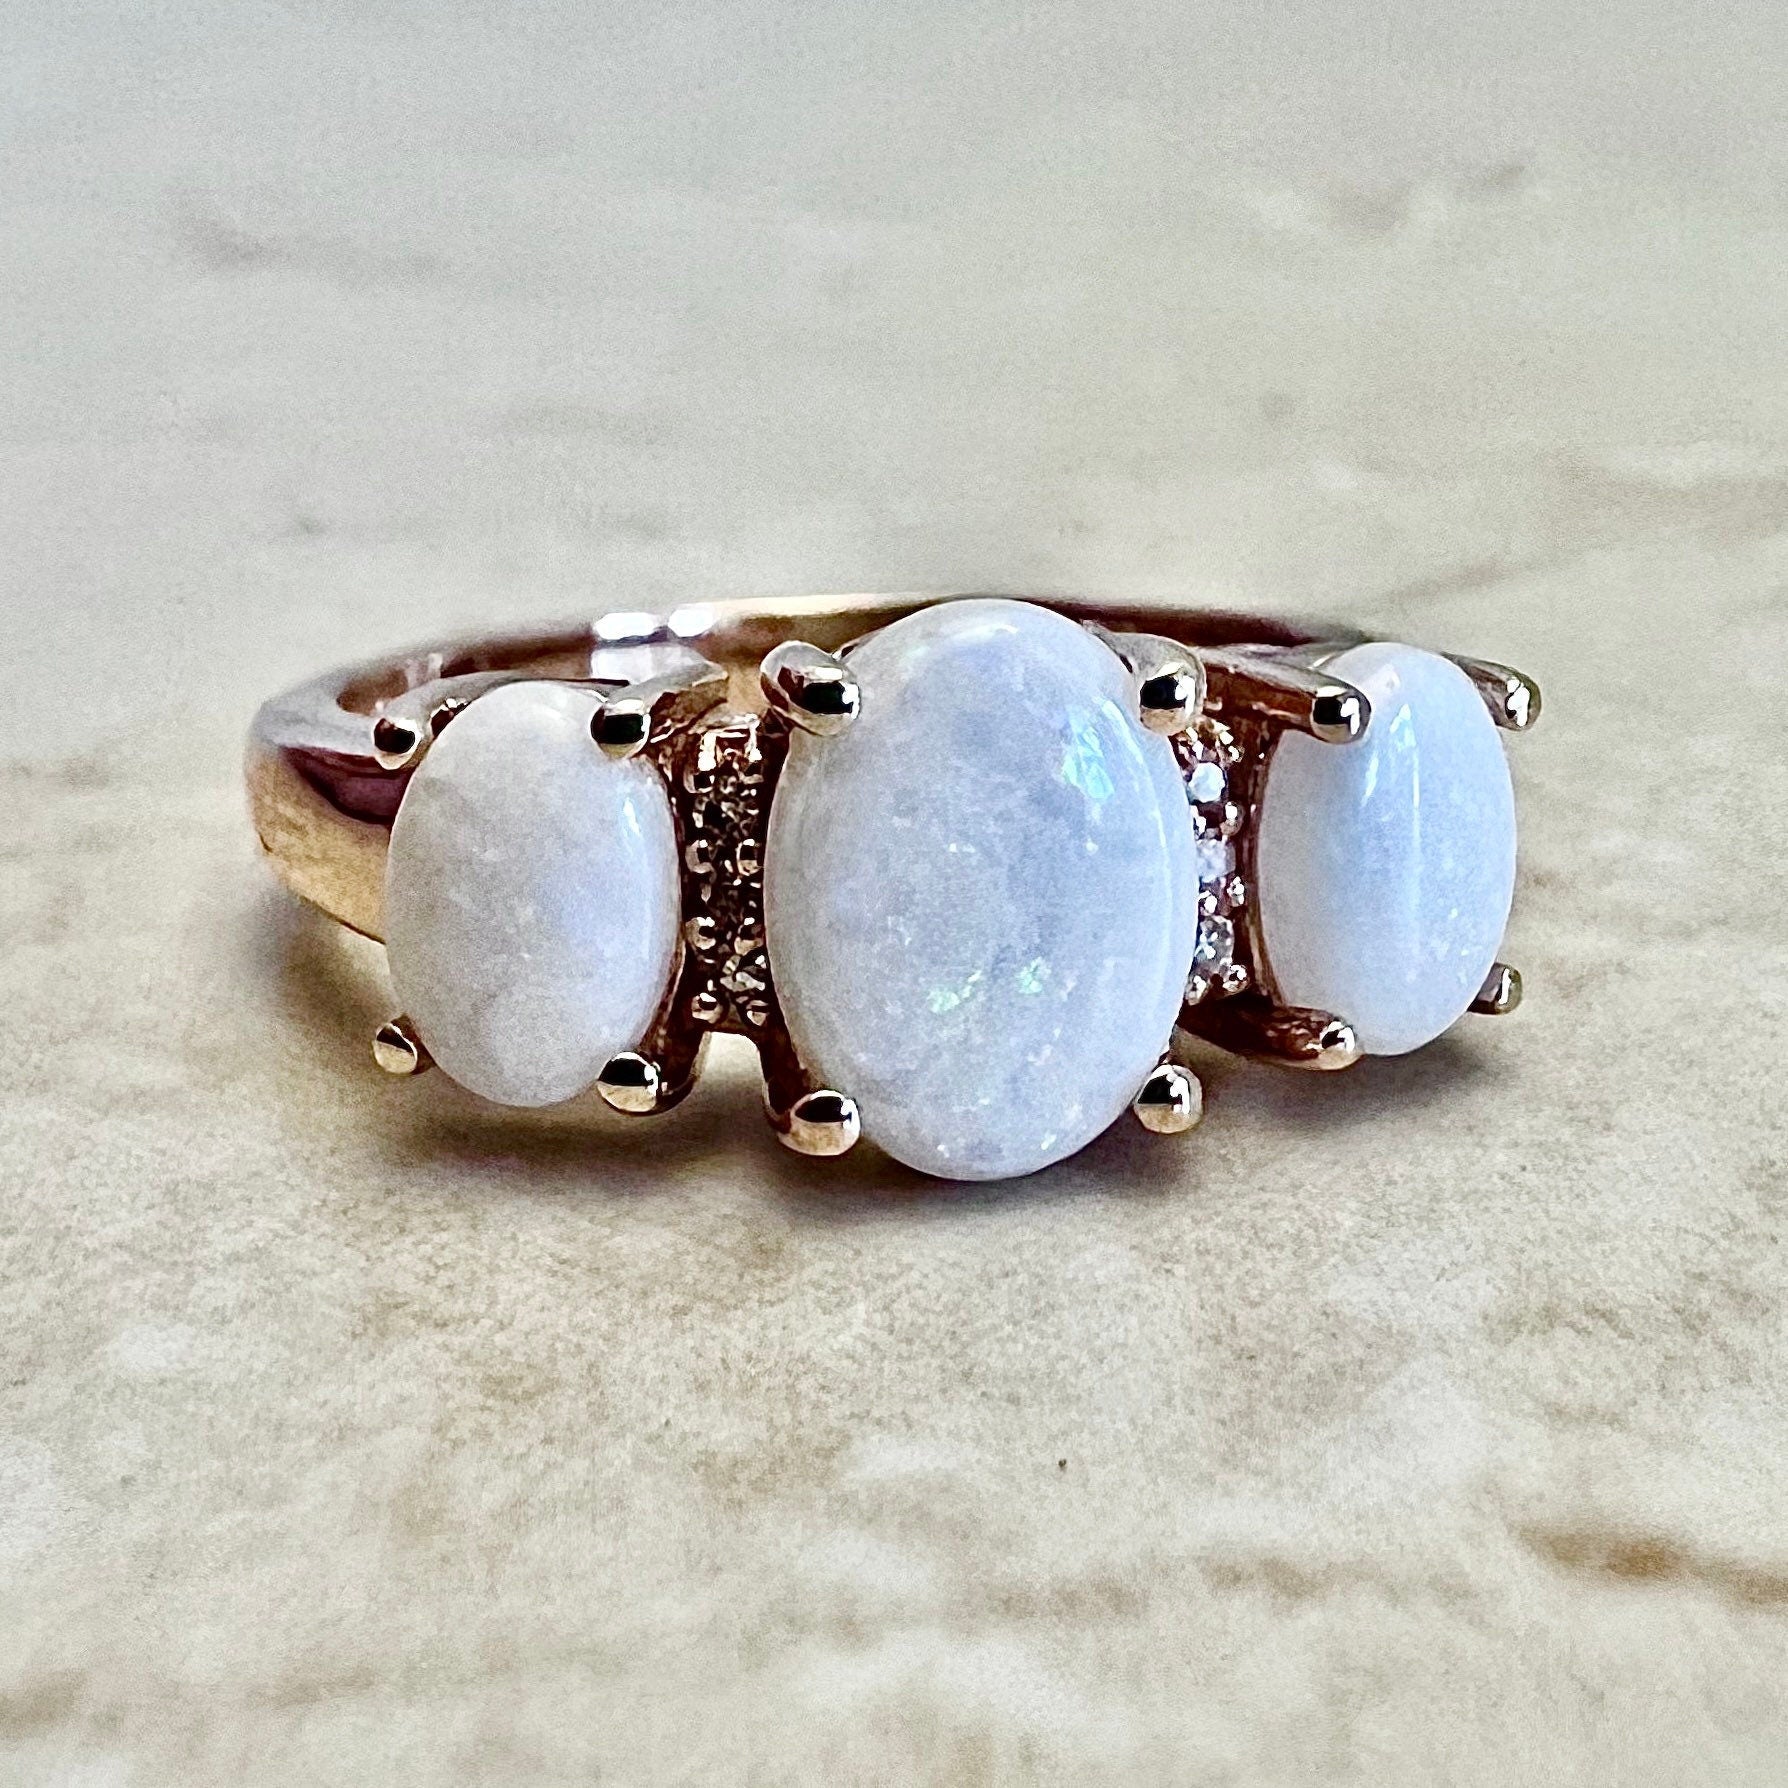 14K Natural Opal & Diamond Cocktail Ring - Rose Gold 3 Stone Ring - October Birthstone - Birthday Gift - Best Gift For Her - Jewelry Sale